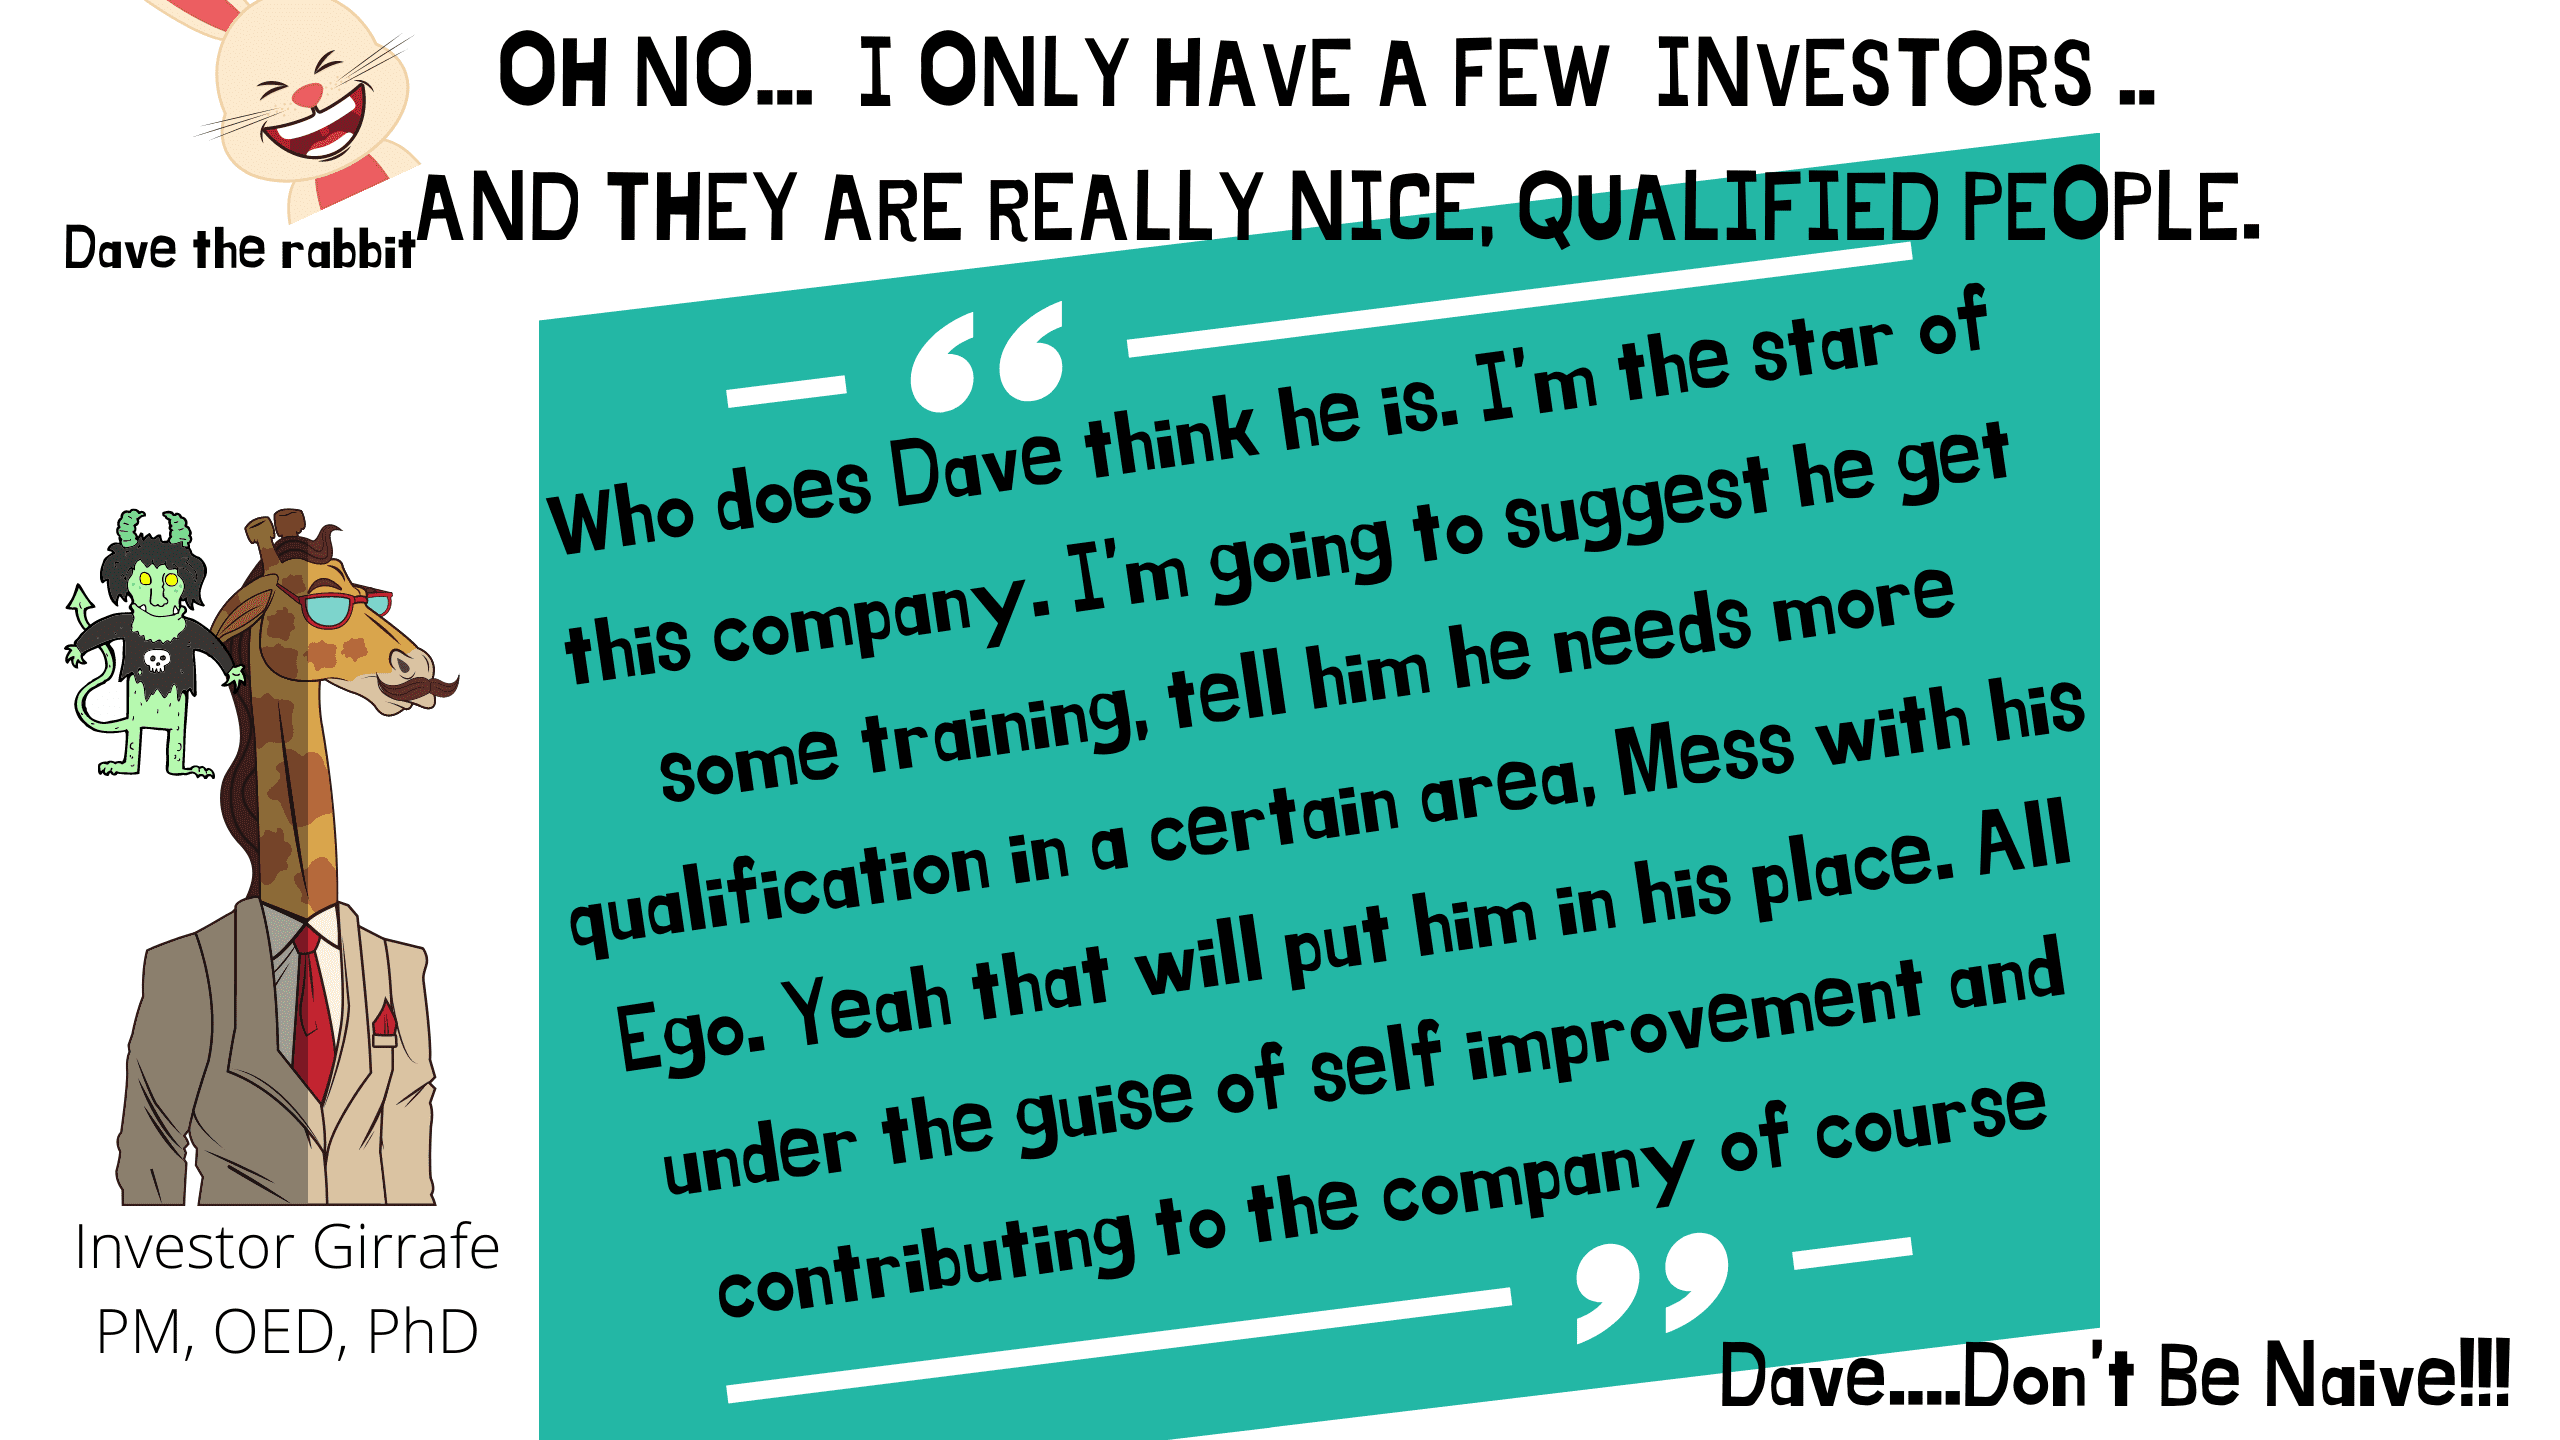 Asshole Investor thinks he is the star of your company!